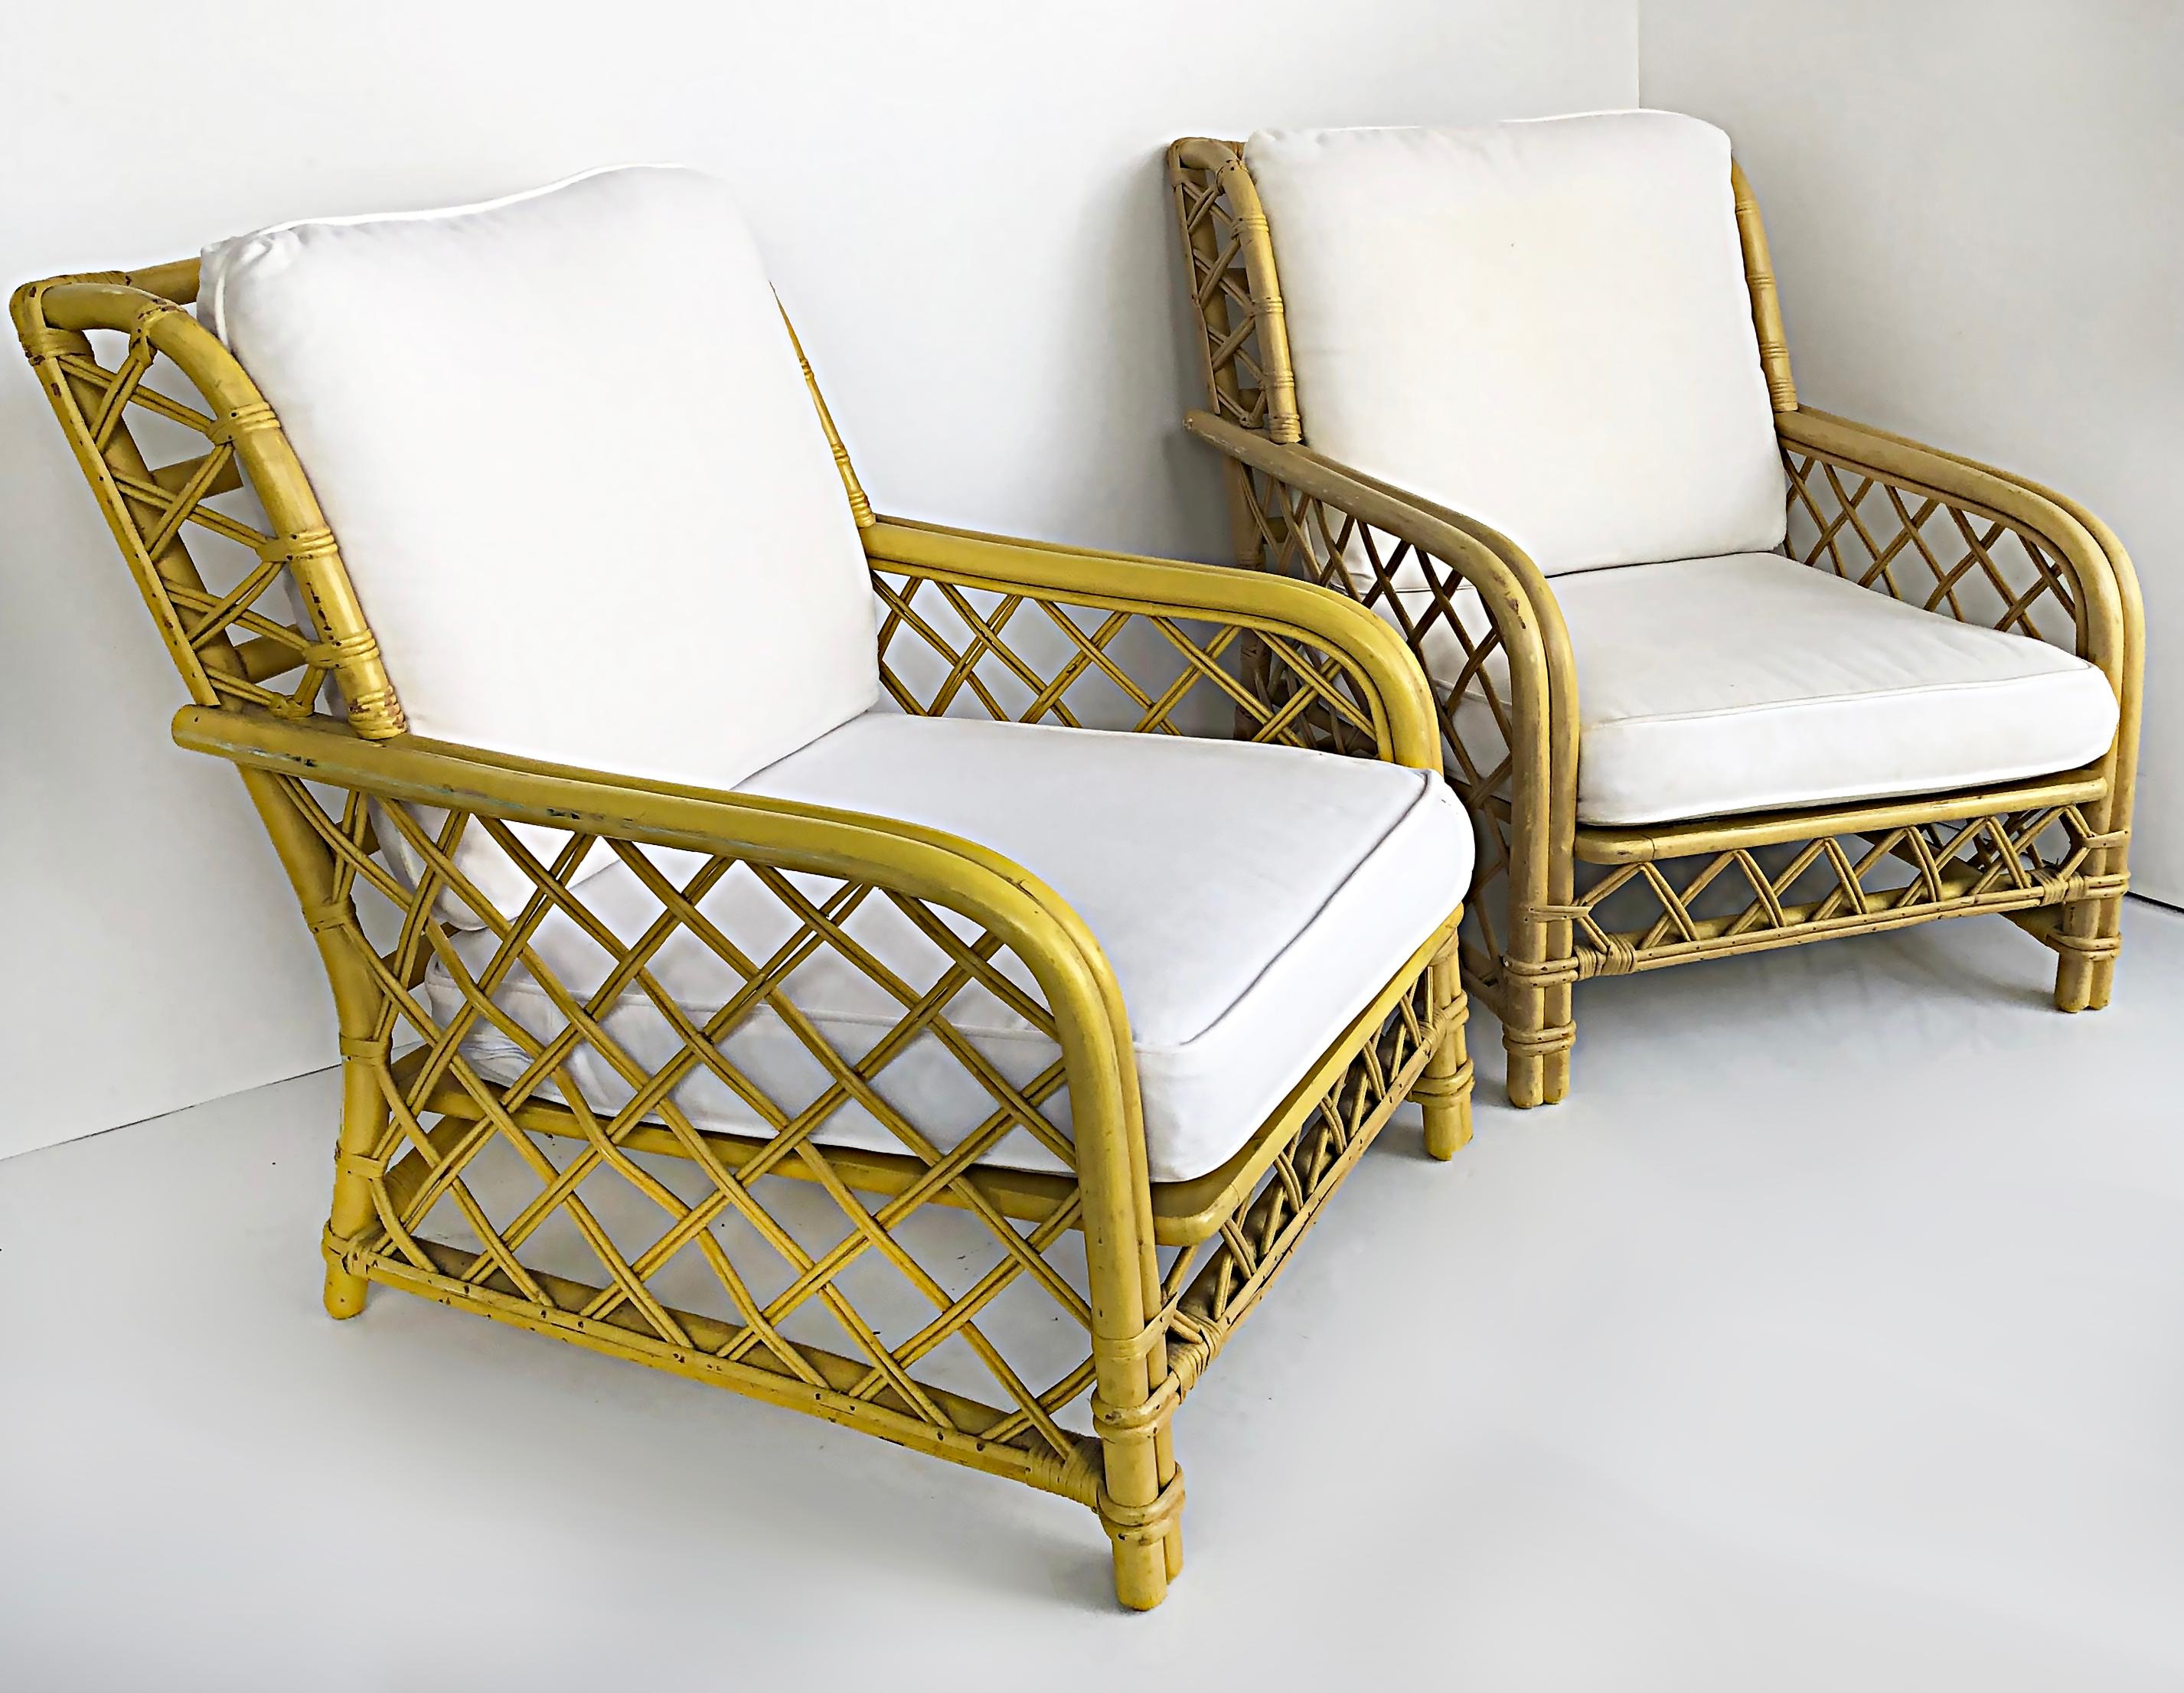 Organic Modern Ficks Reed Bent / Woven Rattan Upholstered Lounge Chairs, Pair